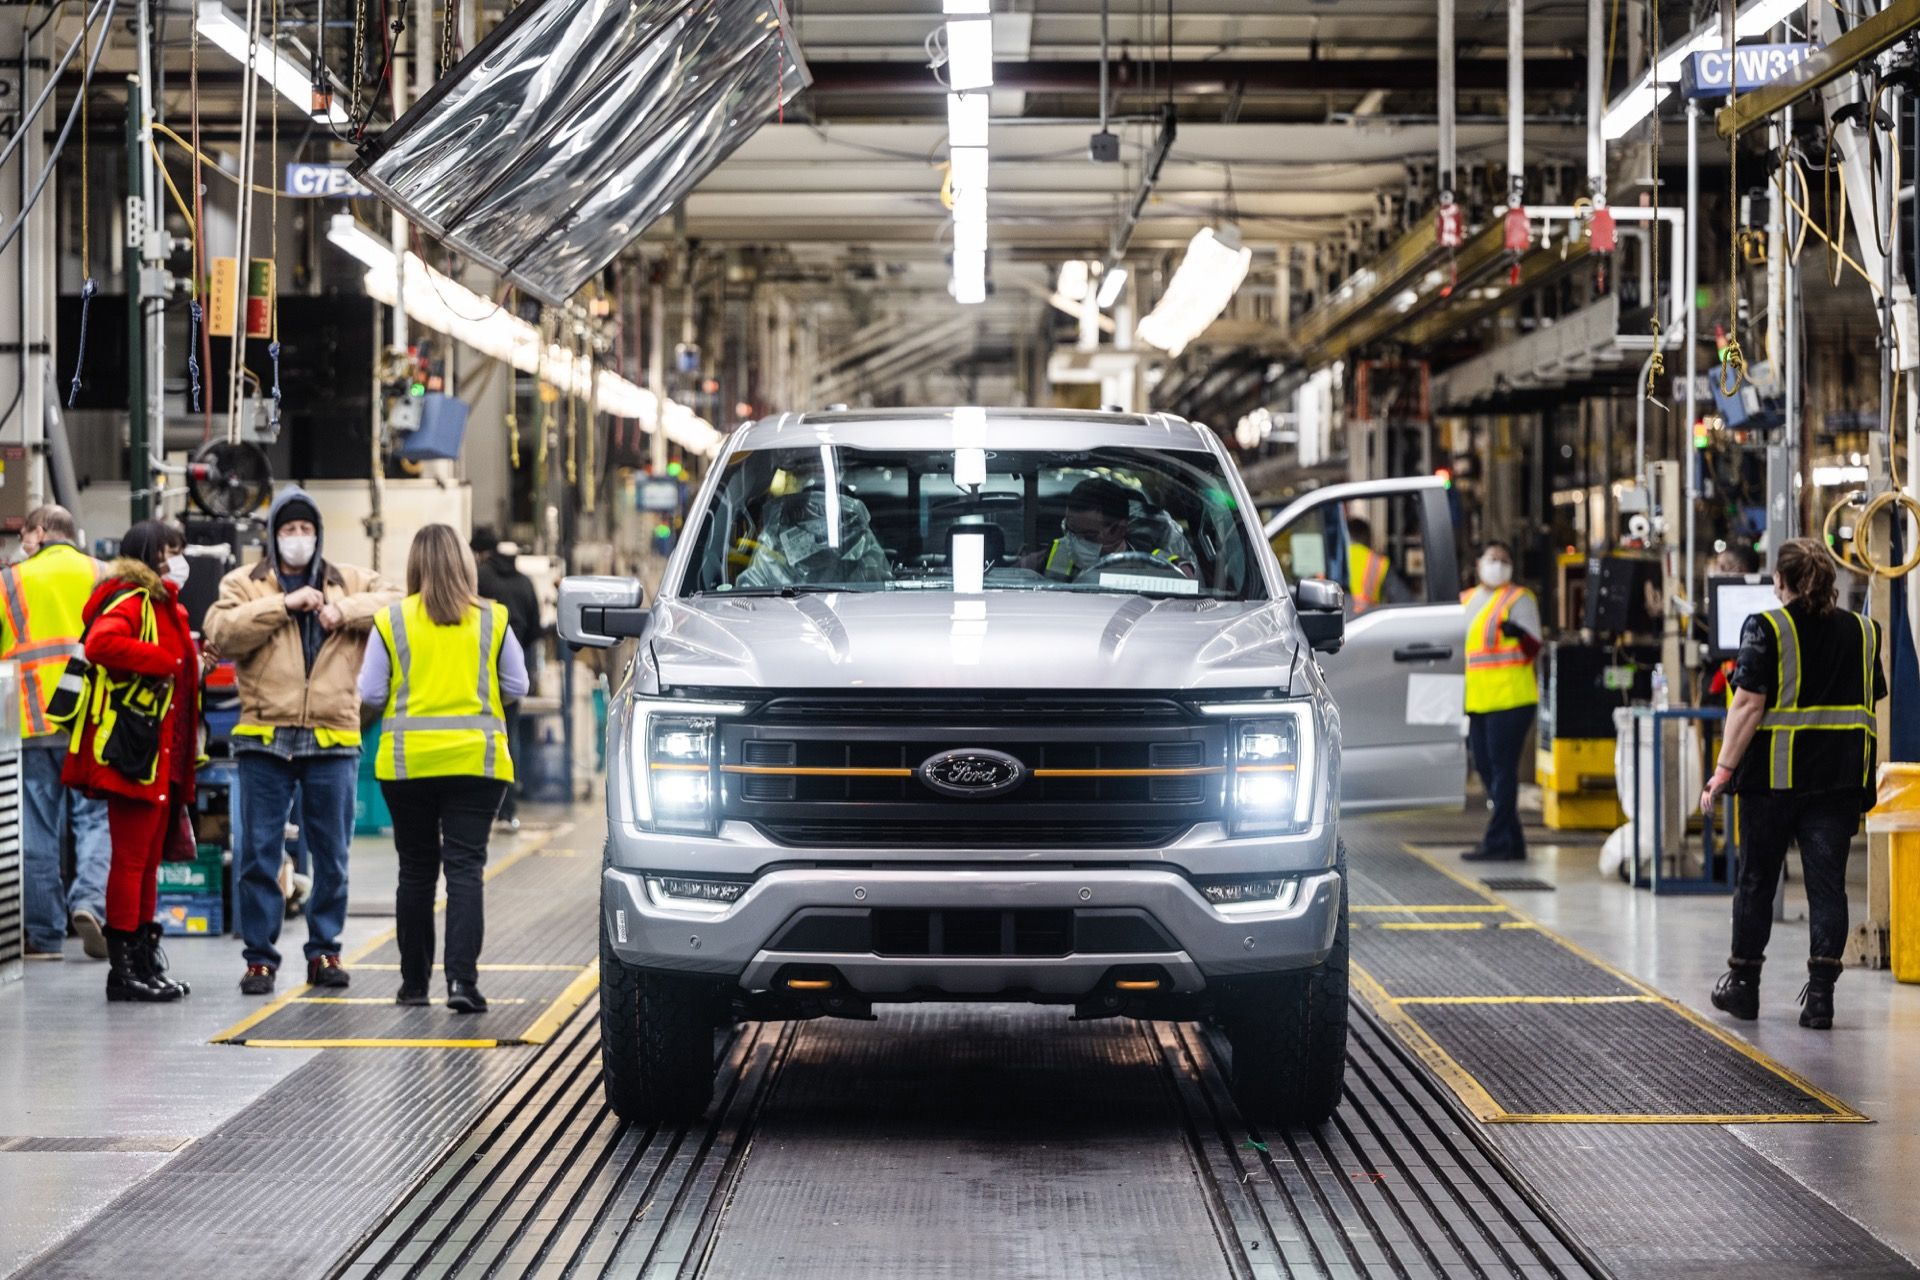 Chip shortage: Ford, Volvo exclude safety features from new cars